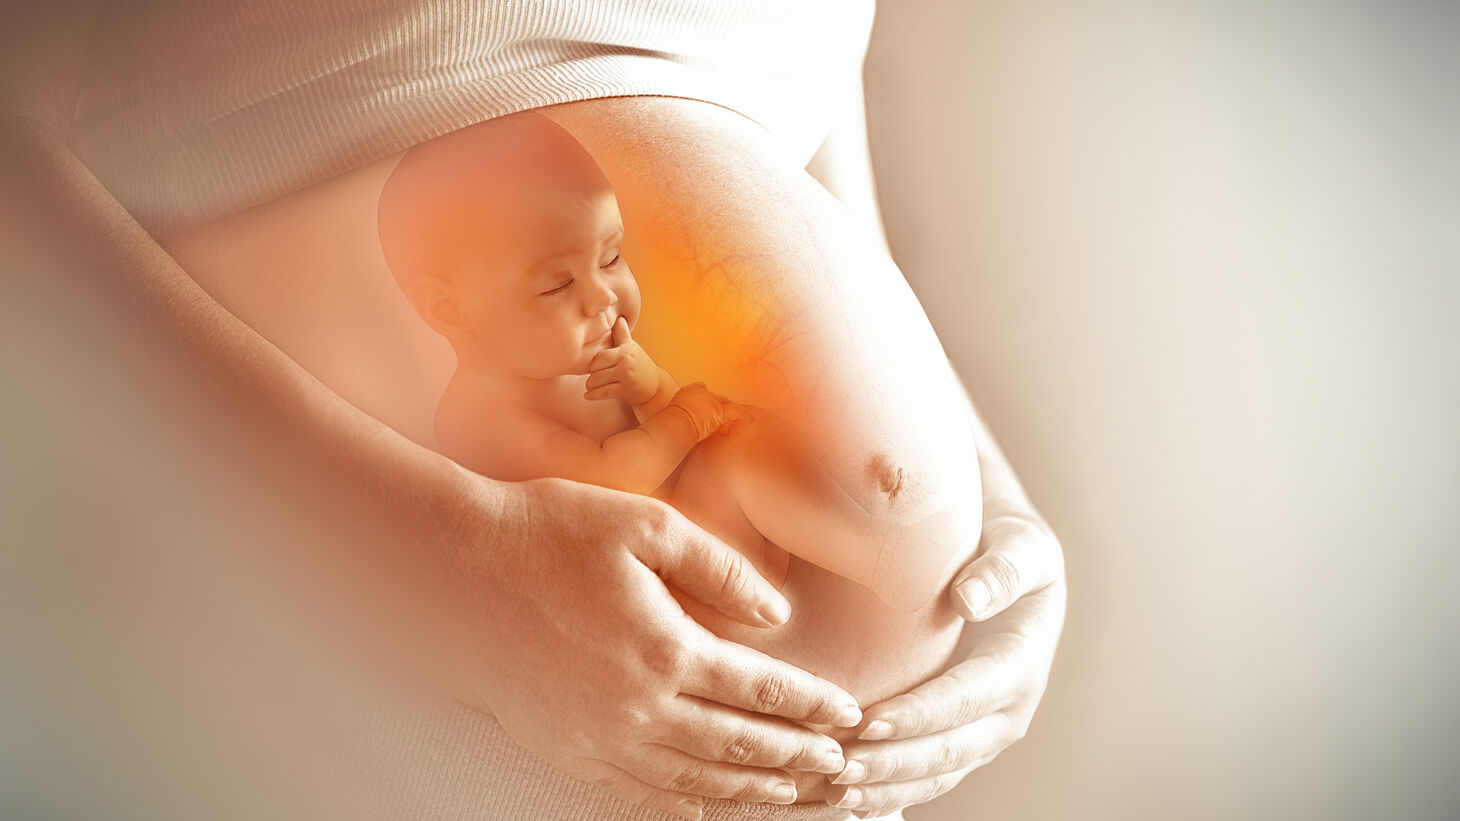 illustration of baby inside a mother's womb